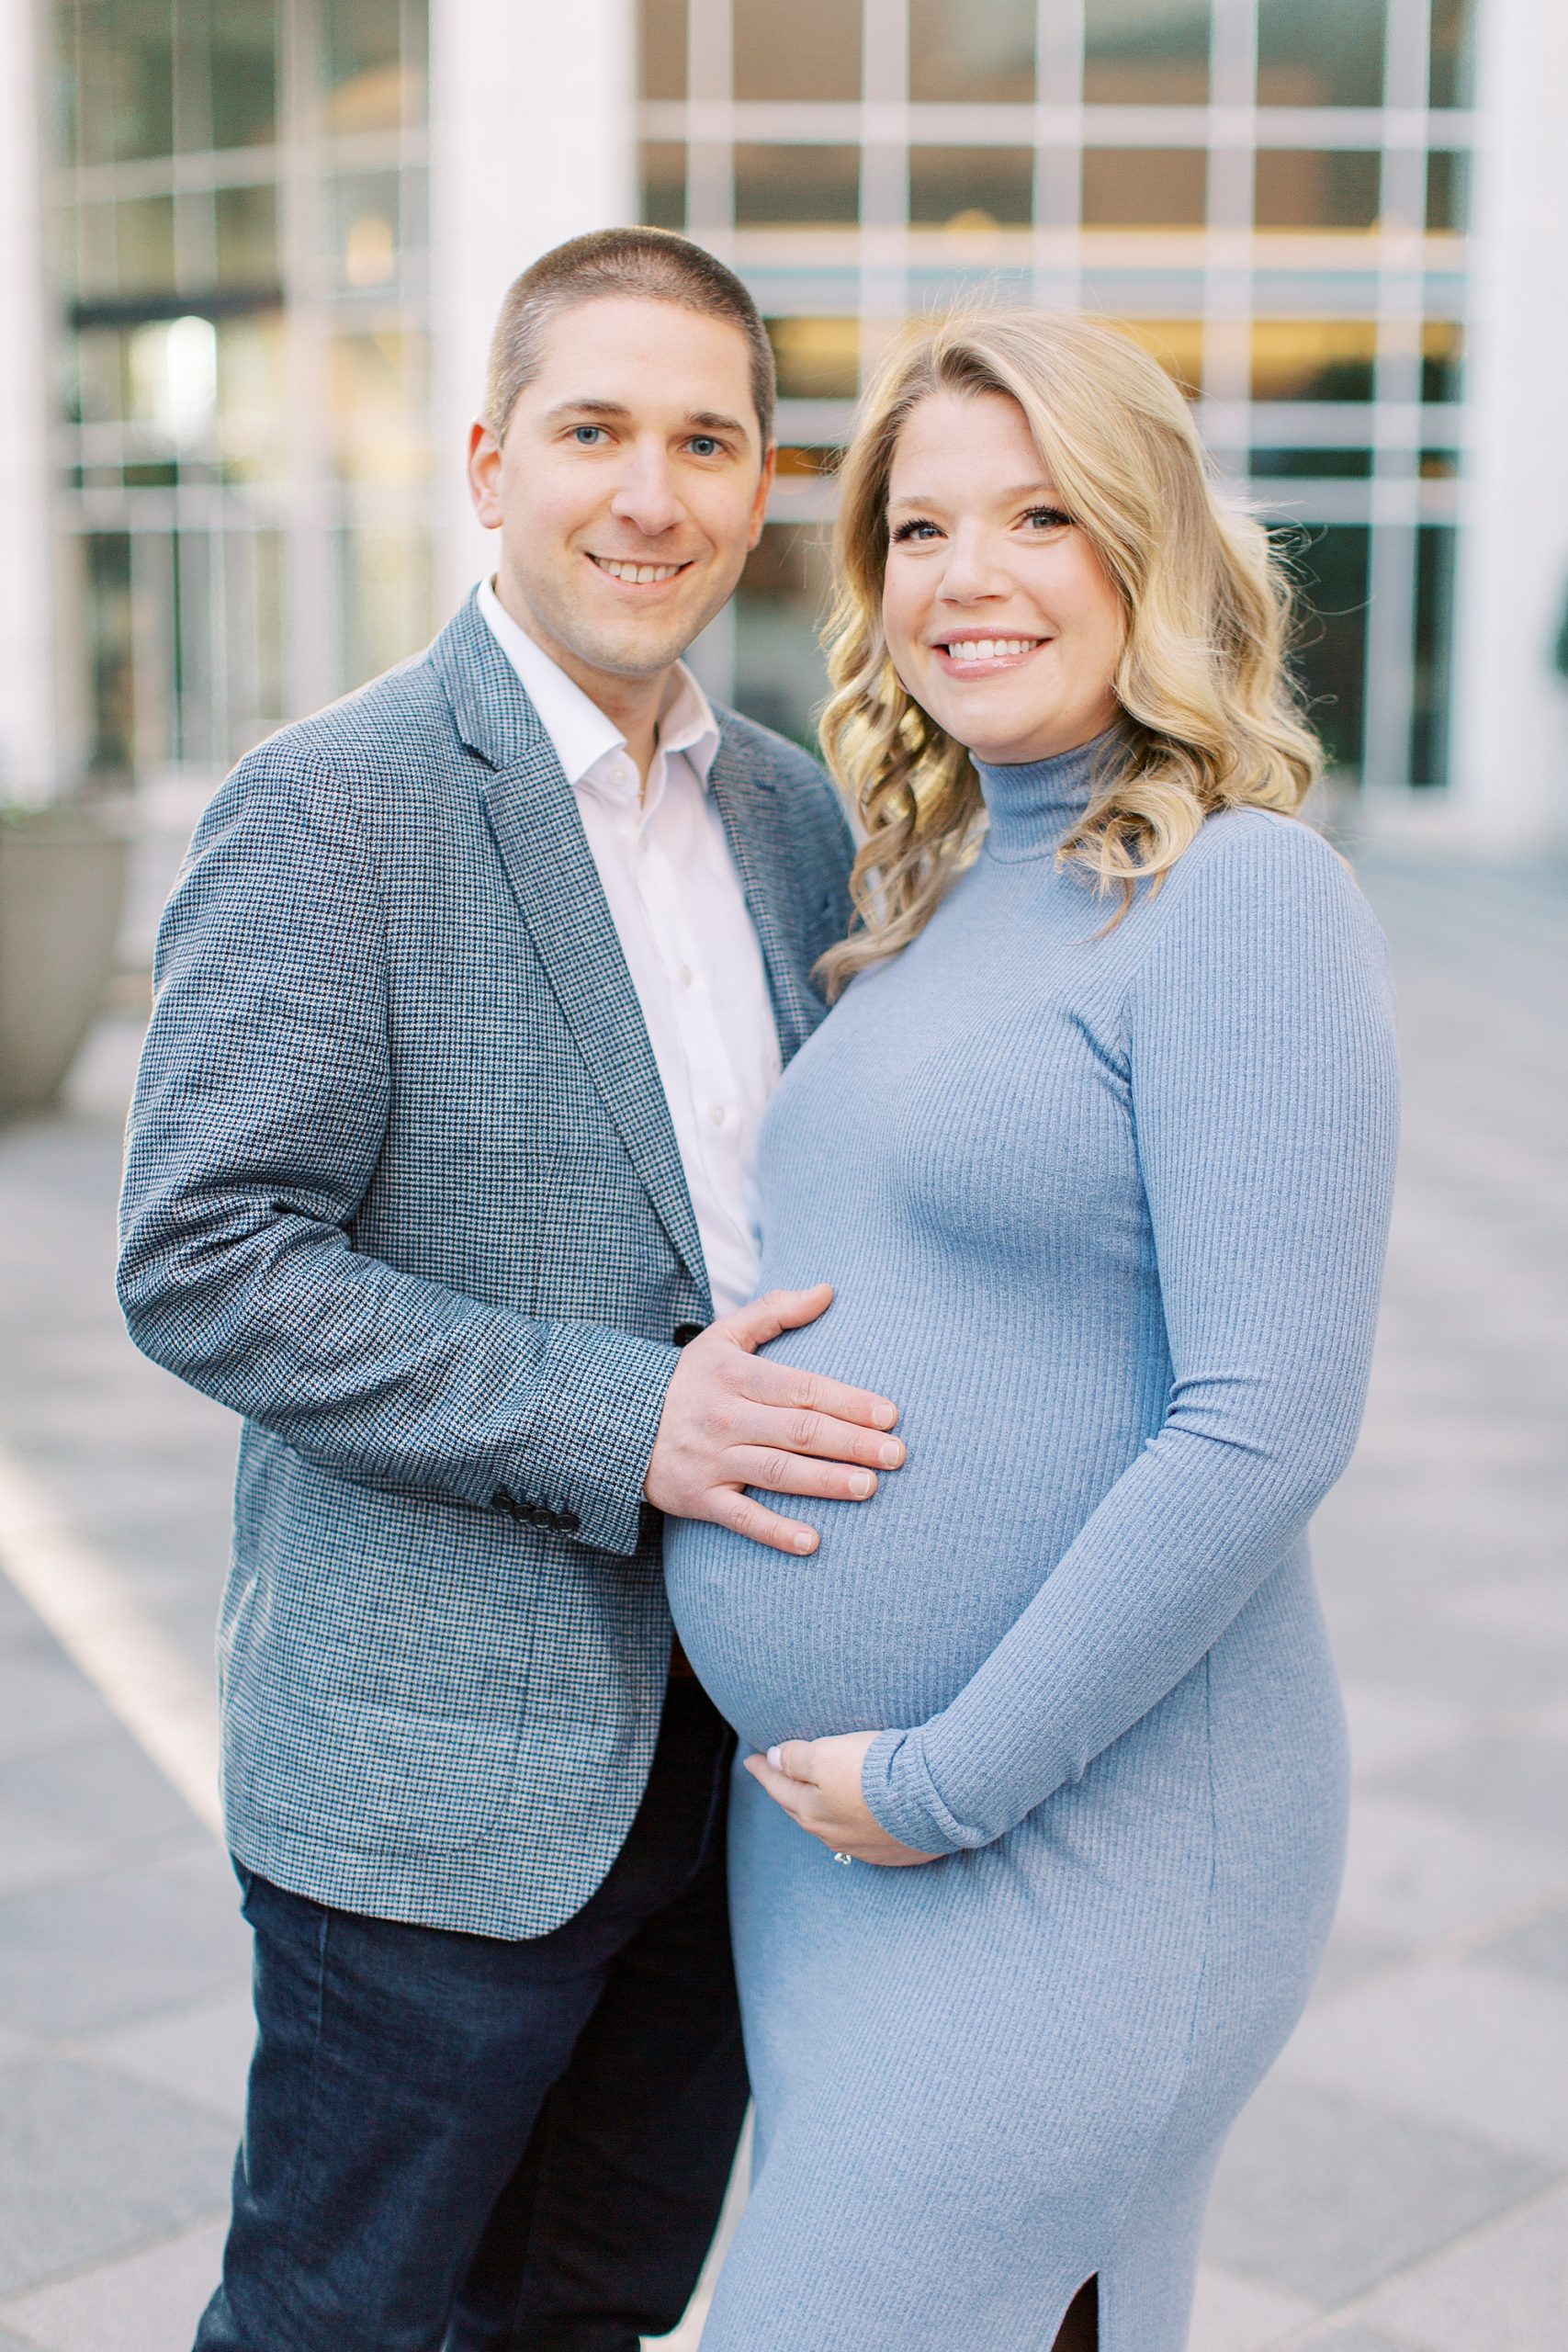 winter maternity portraits in Charlotte NC for woman in blue dress